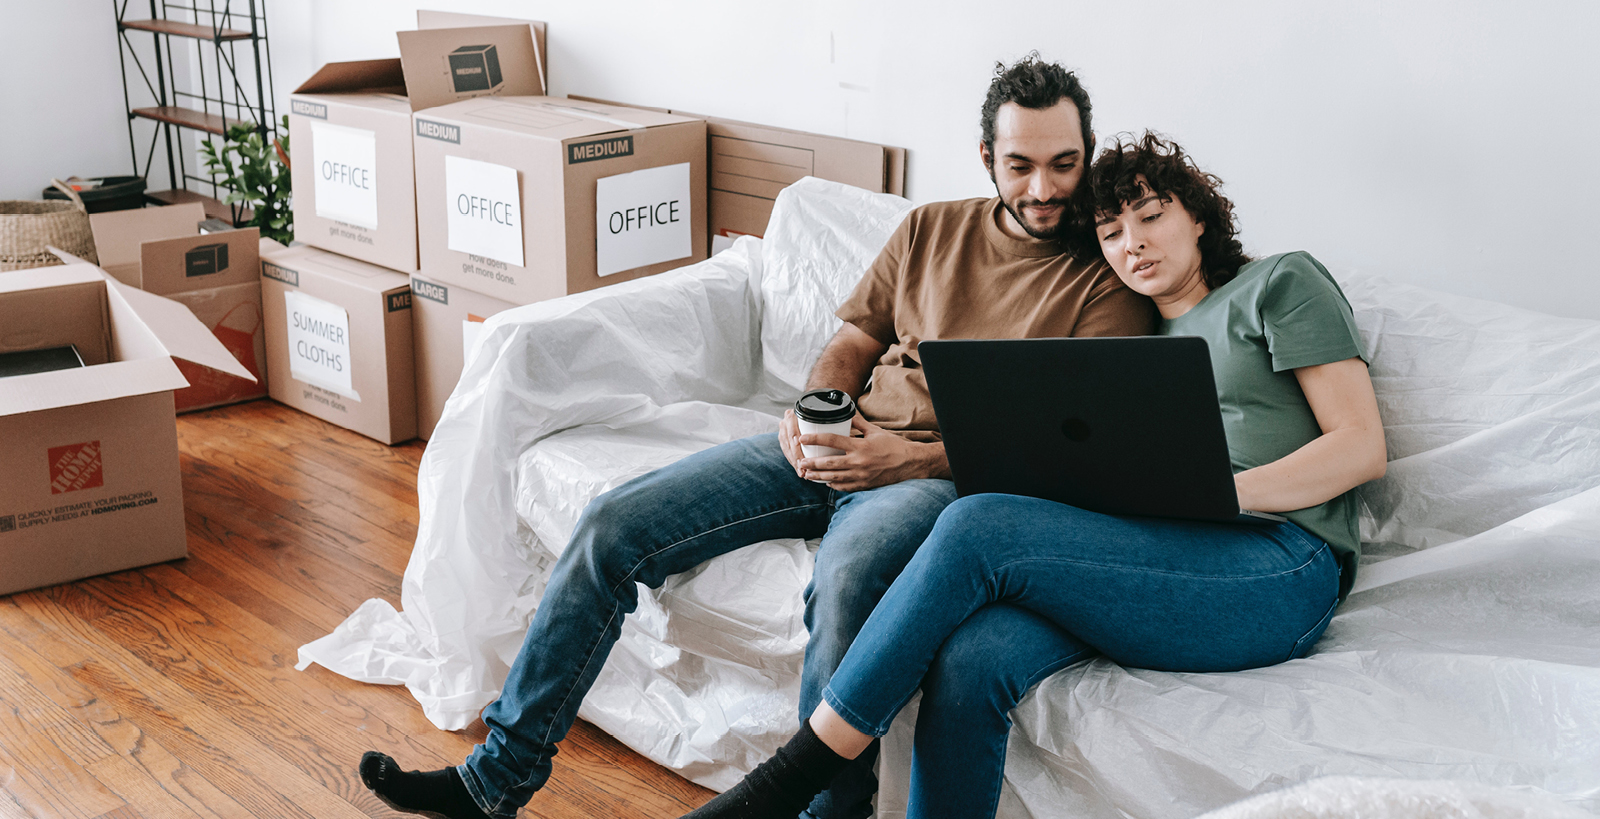 A young couple sits on a couch using a laptop, surrounded by unpacked moving boxes